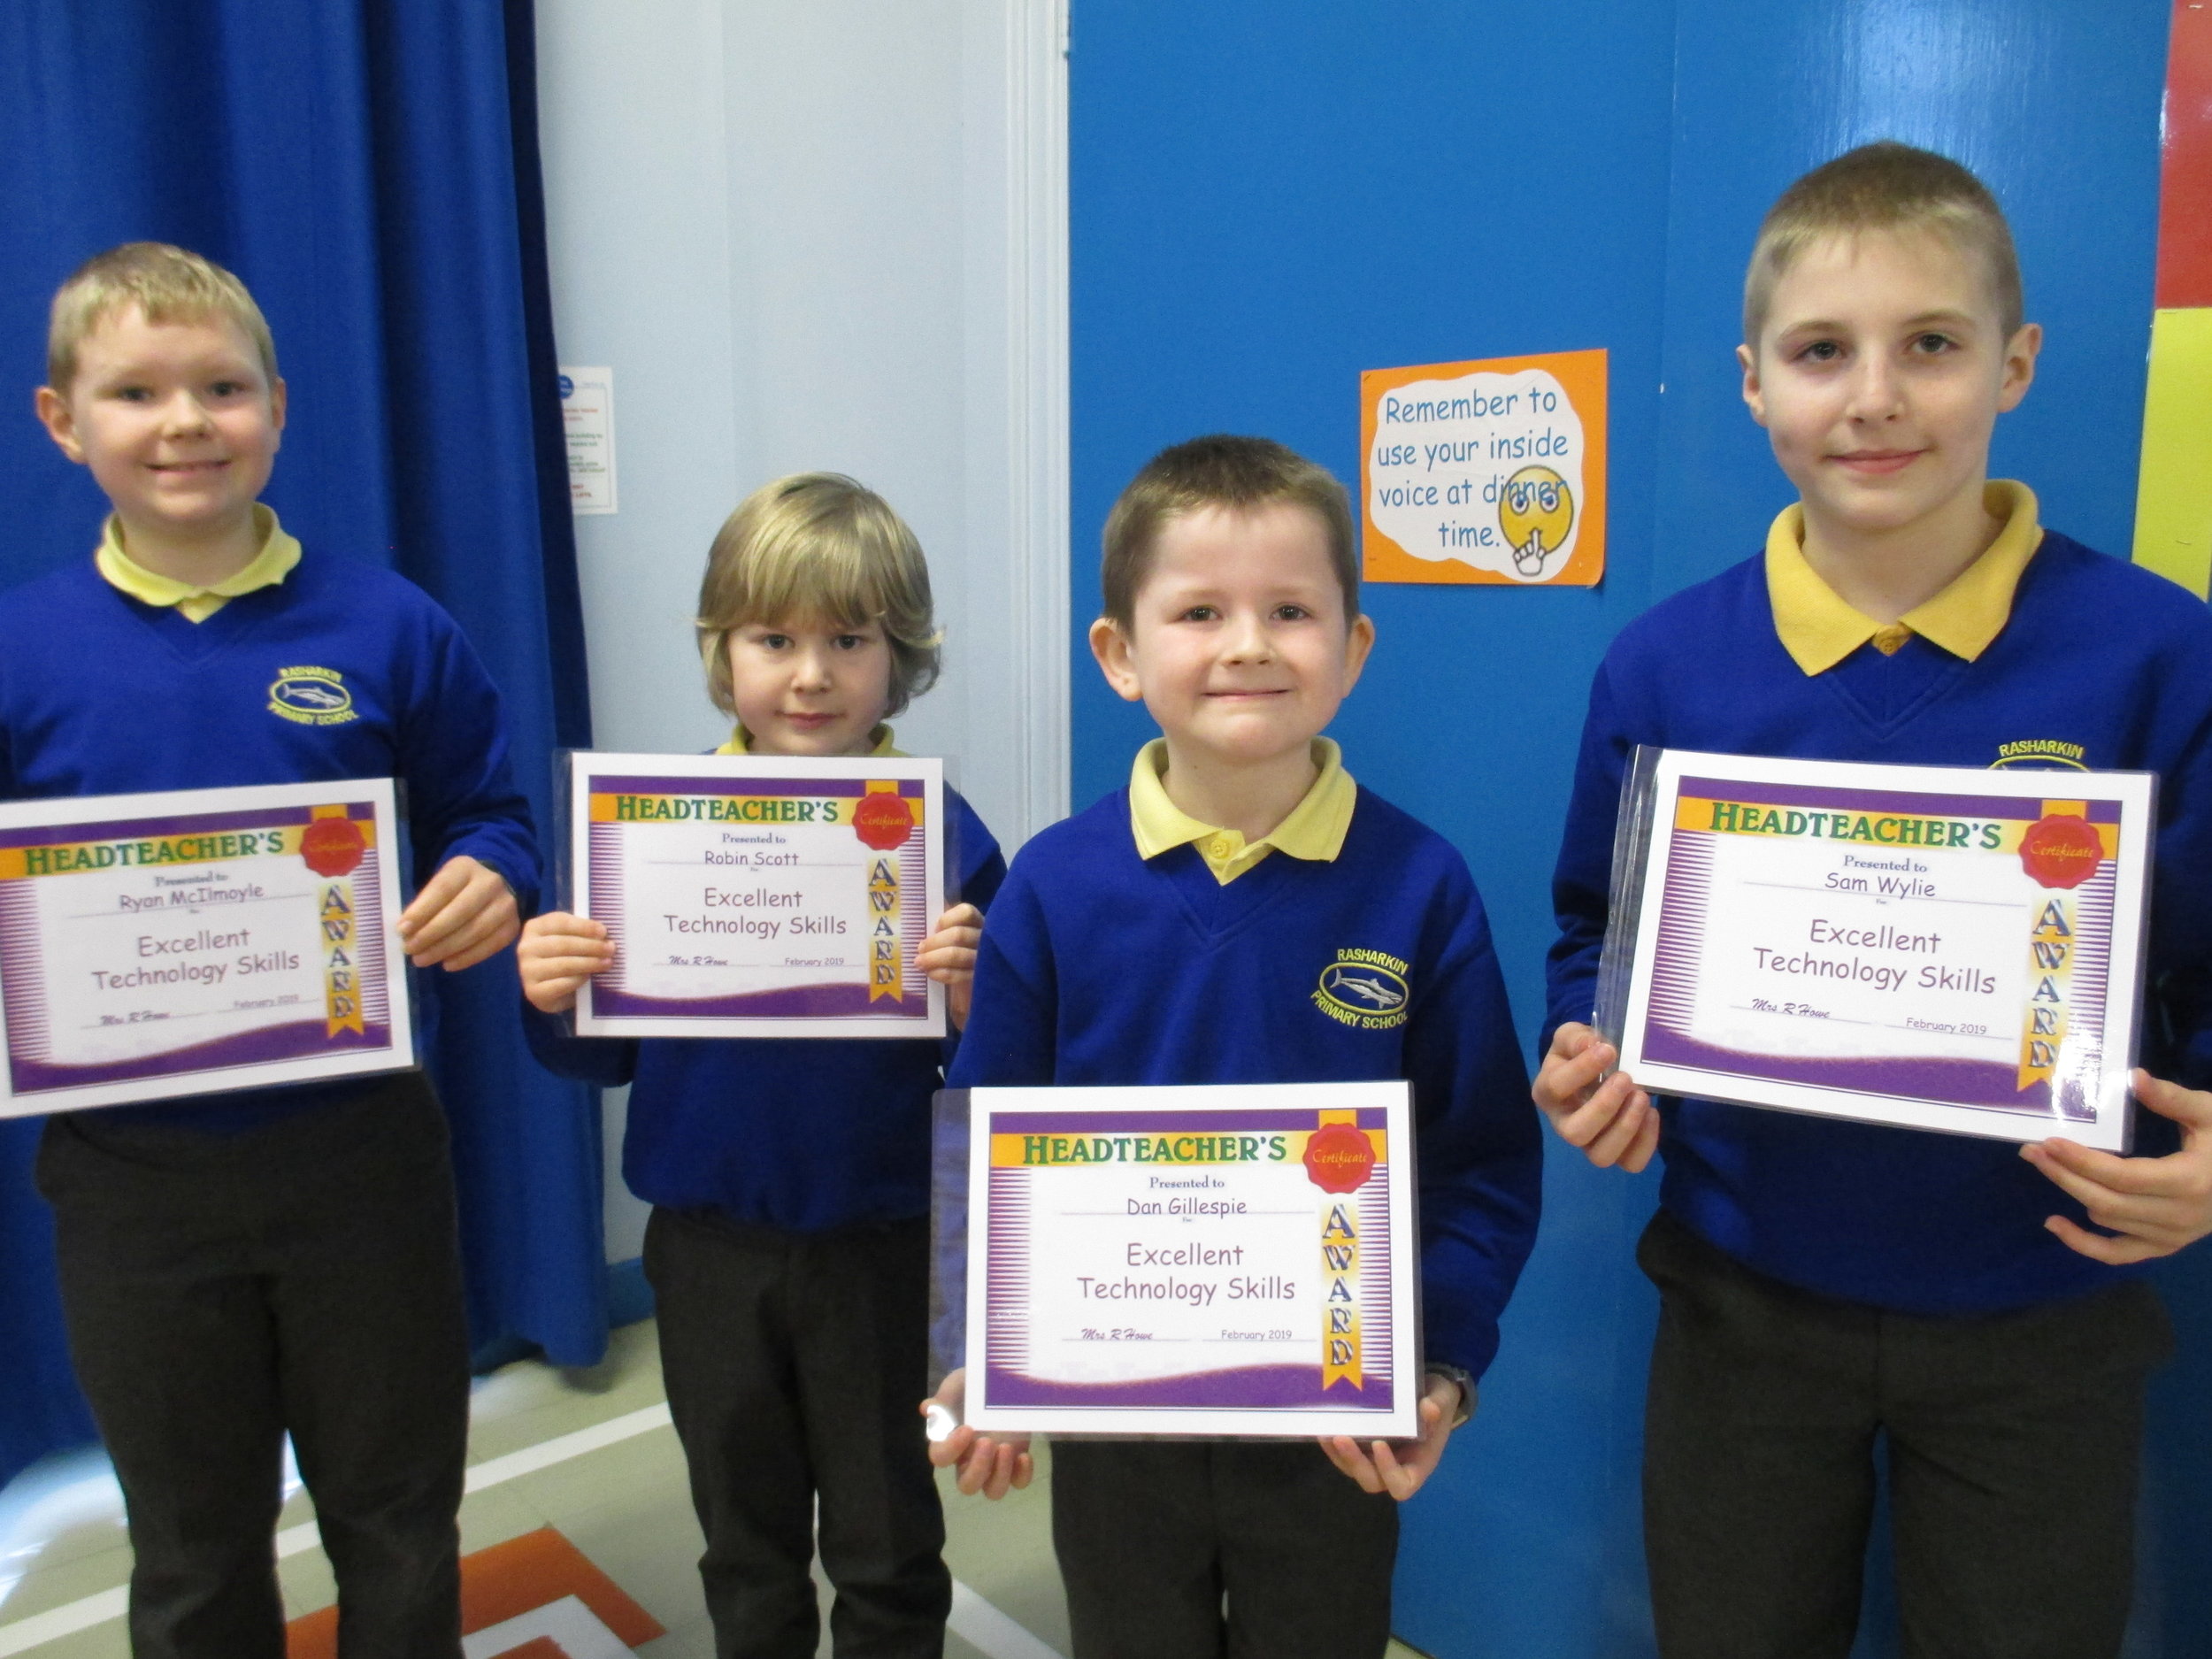 Ryan, Robin, Dan and Sam received certificates for 'Excellent Technology Skills'.